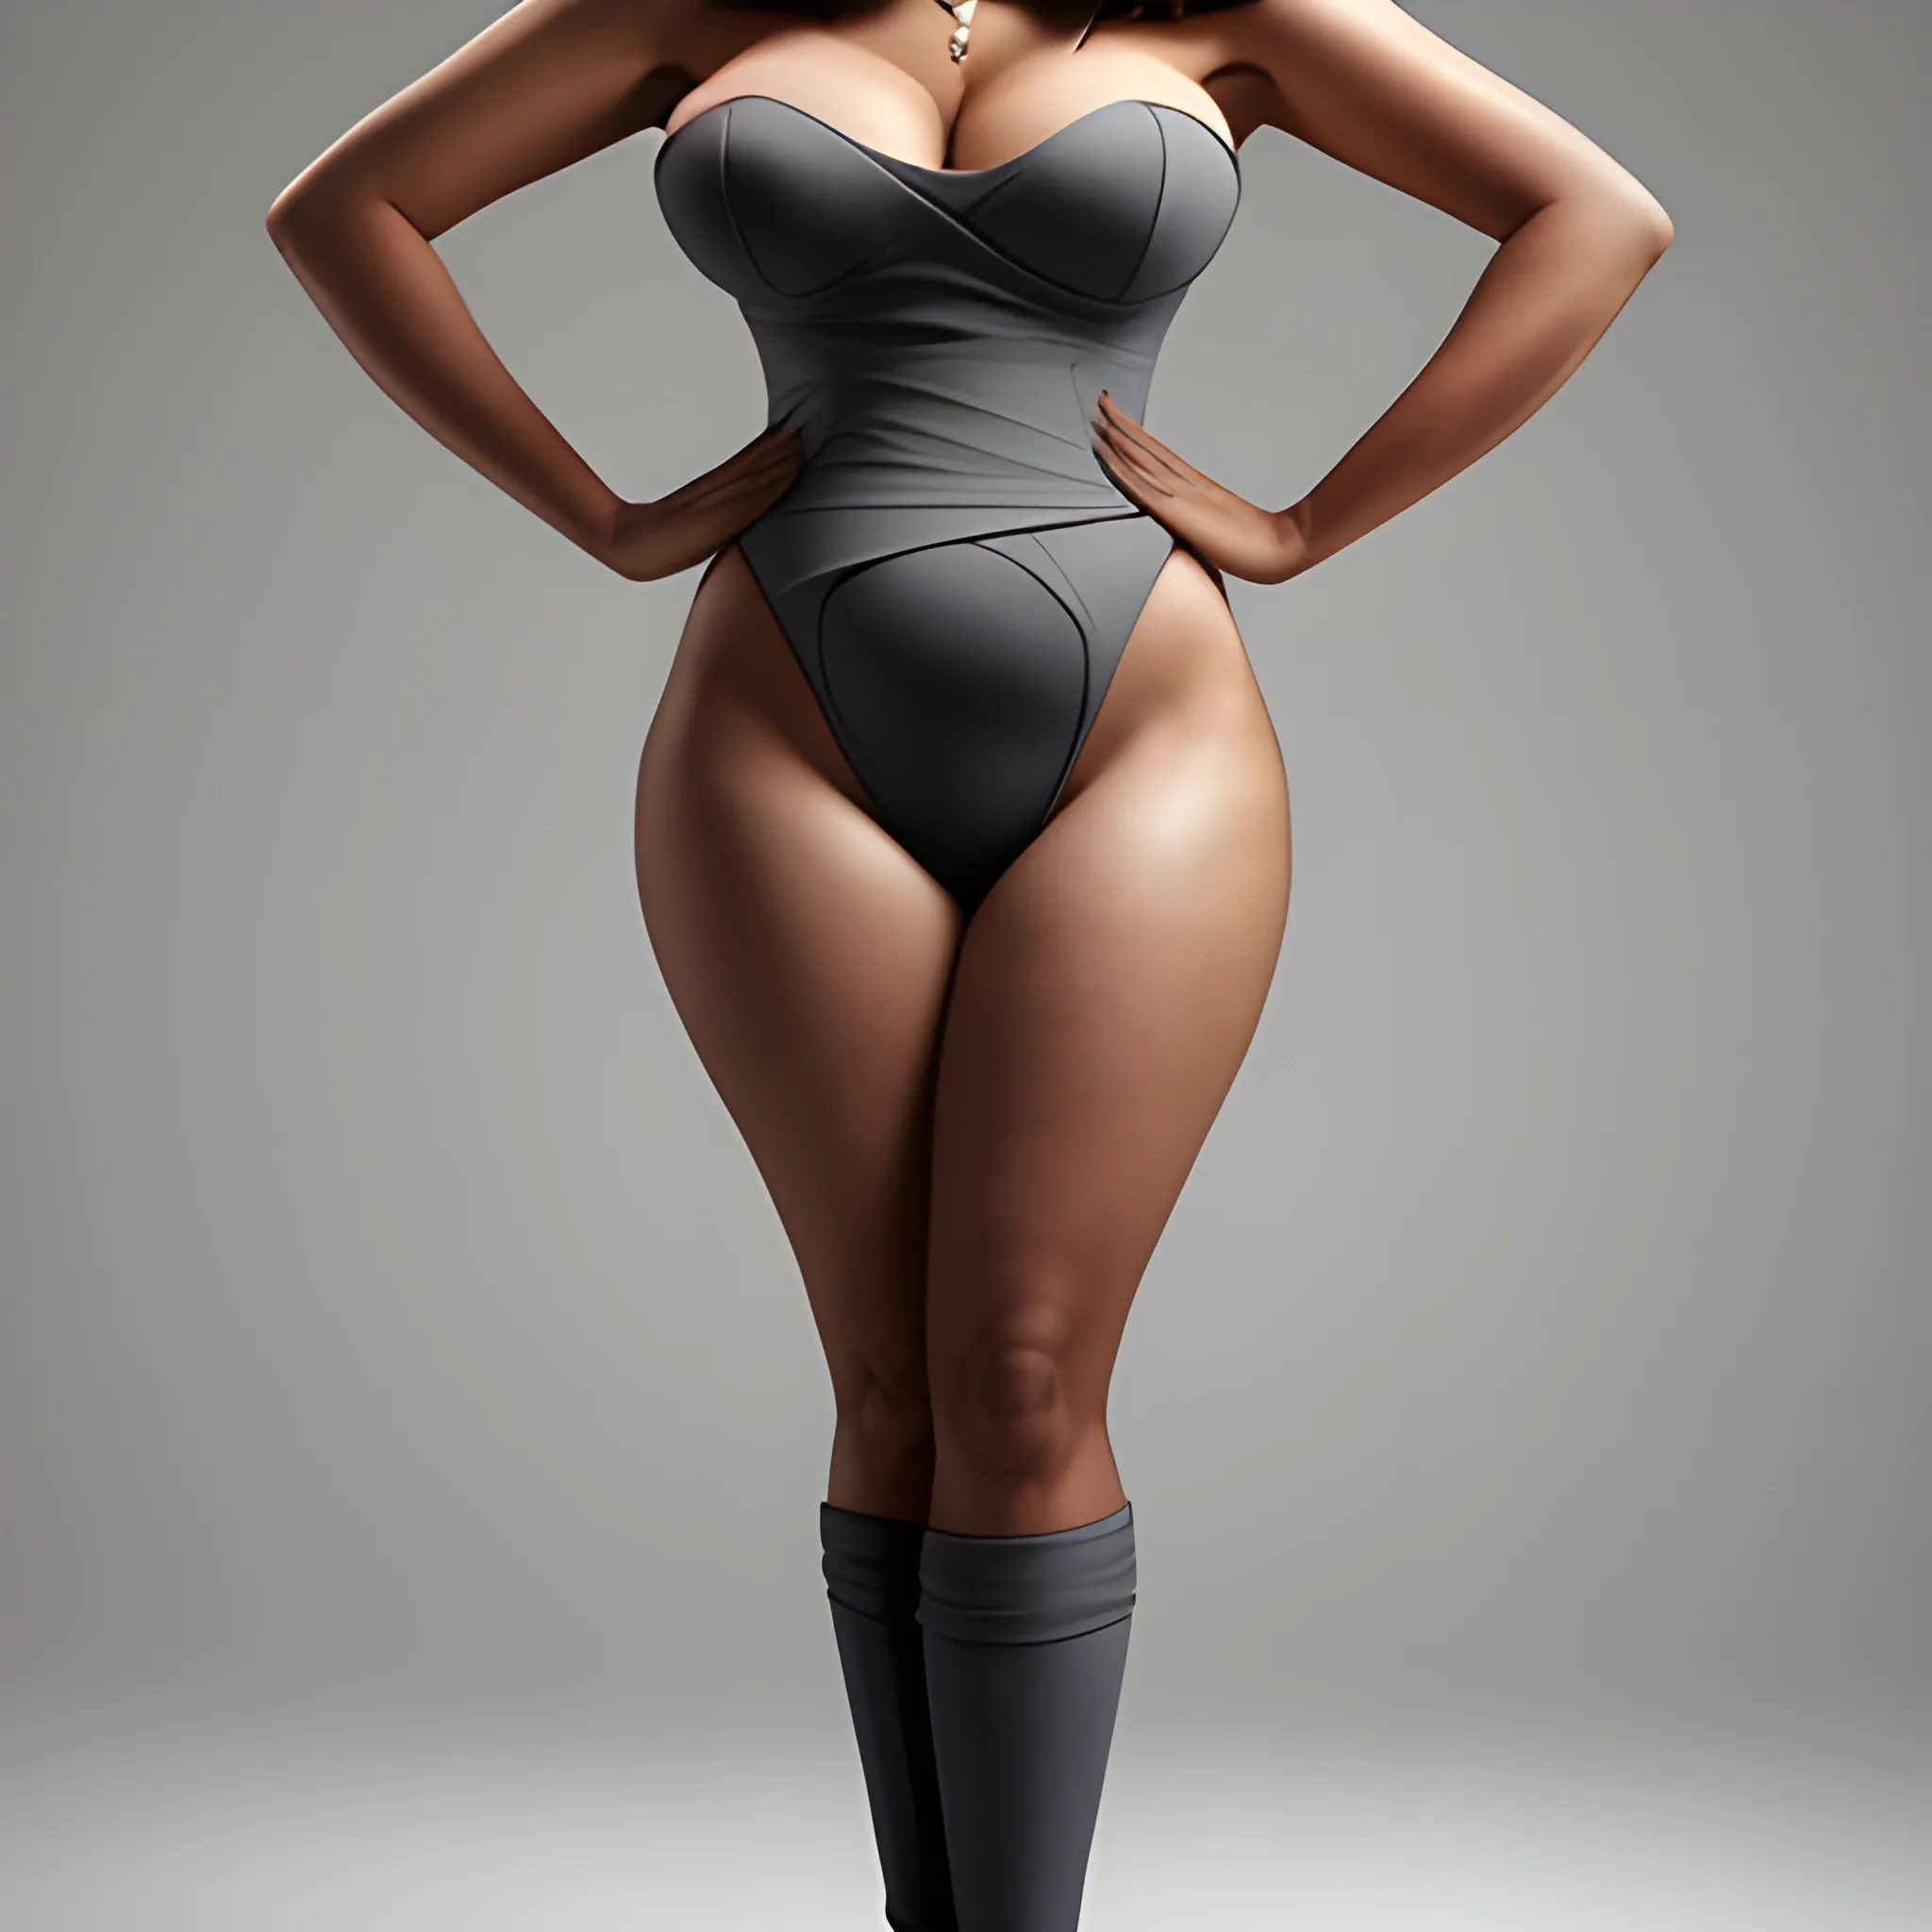 A full-length outfit photo capturing her balanced bone structure and the curves of her bust and hips balanced by slightly angular shoulders.